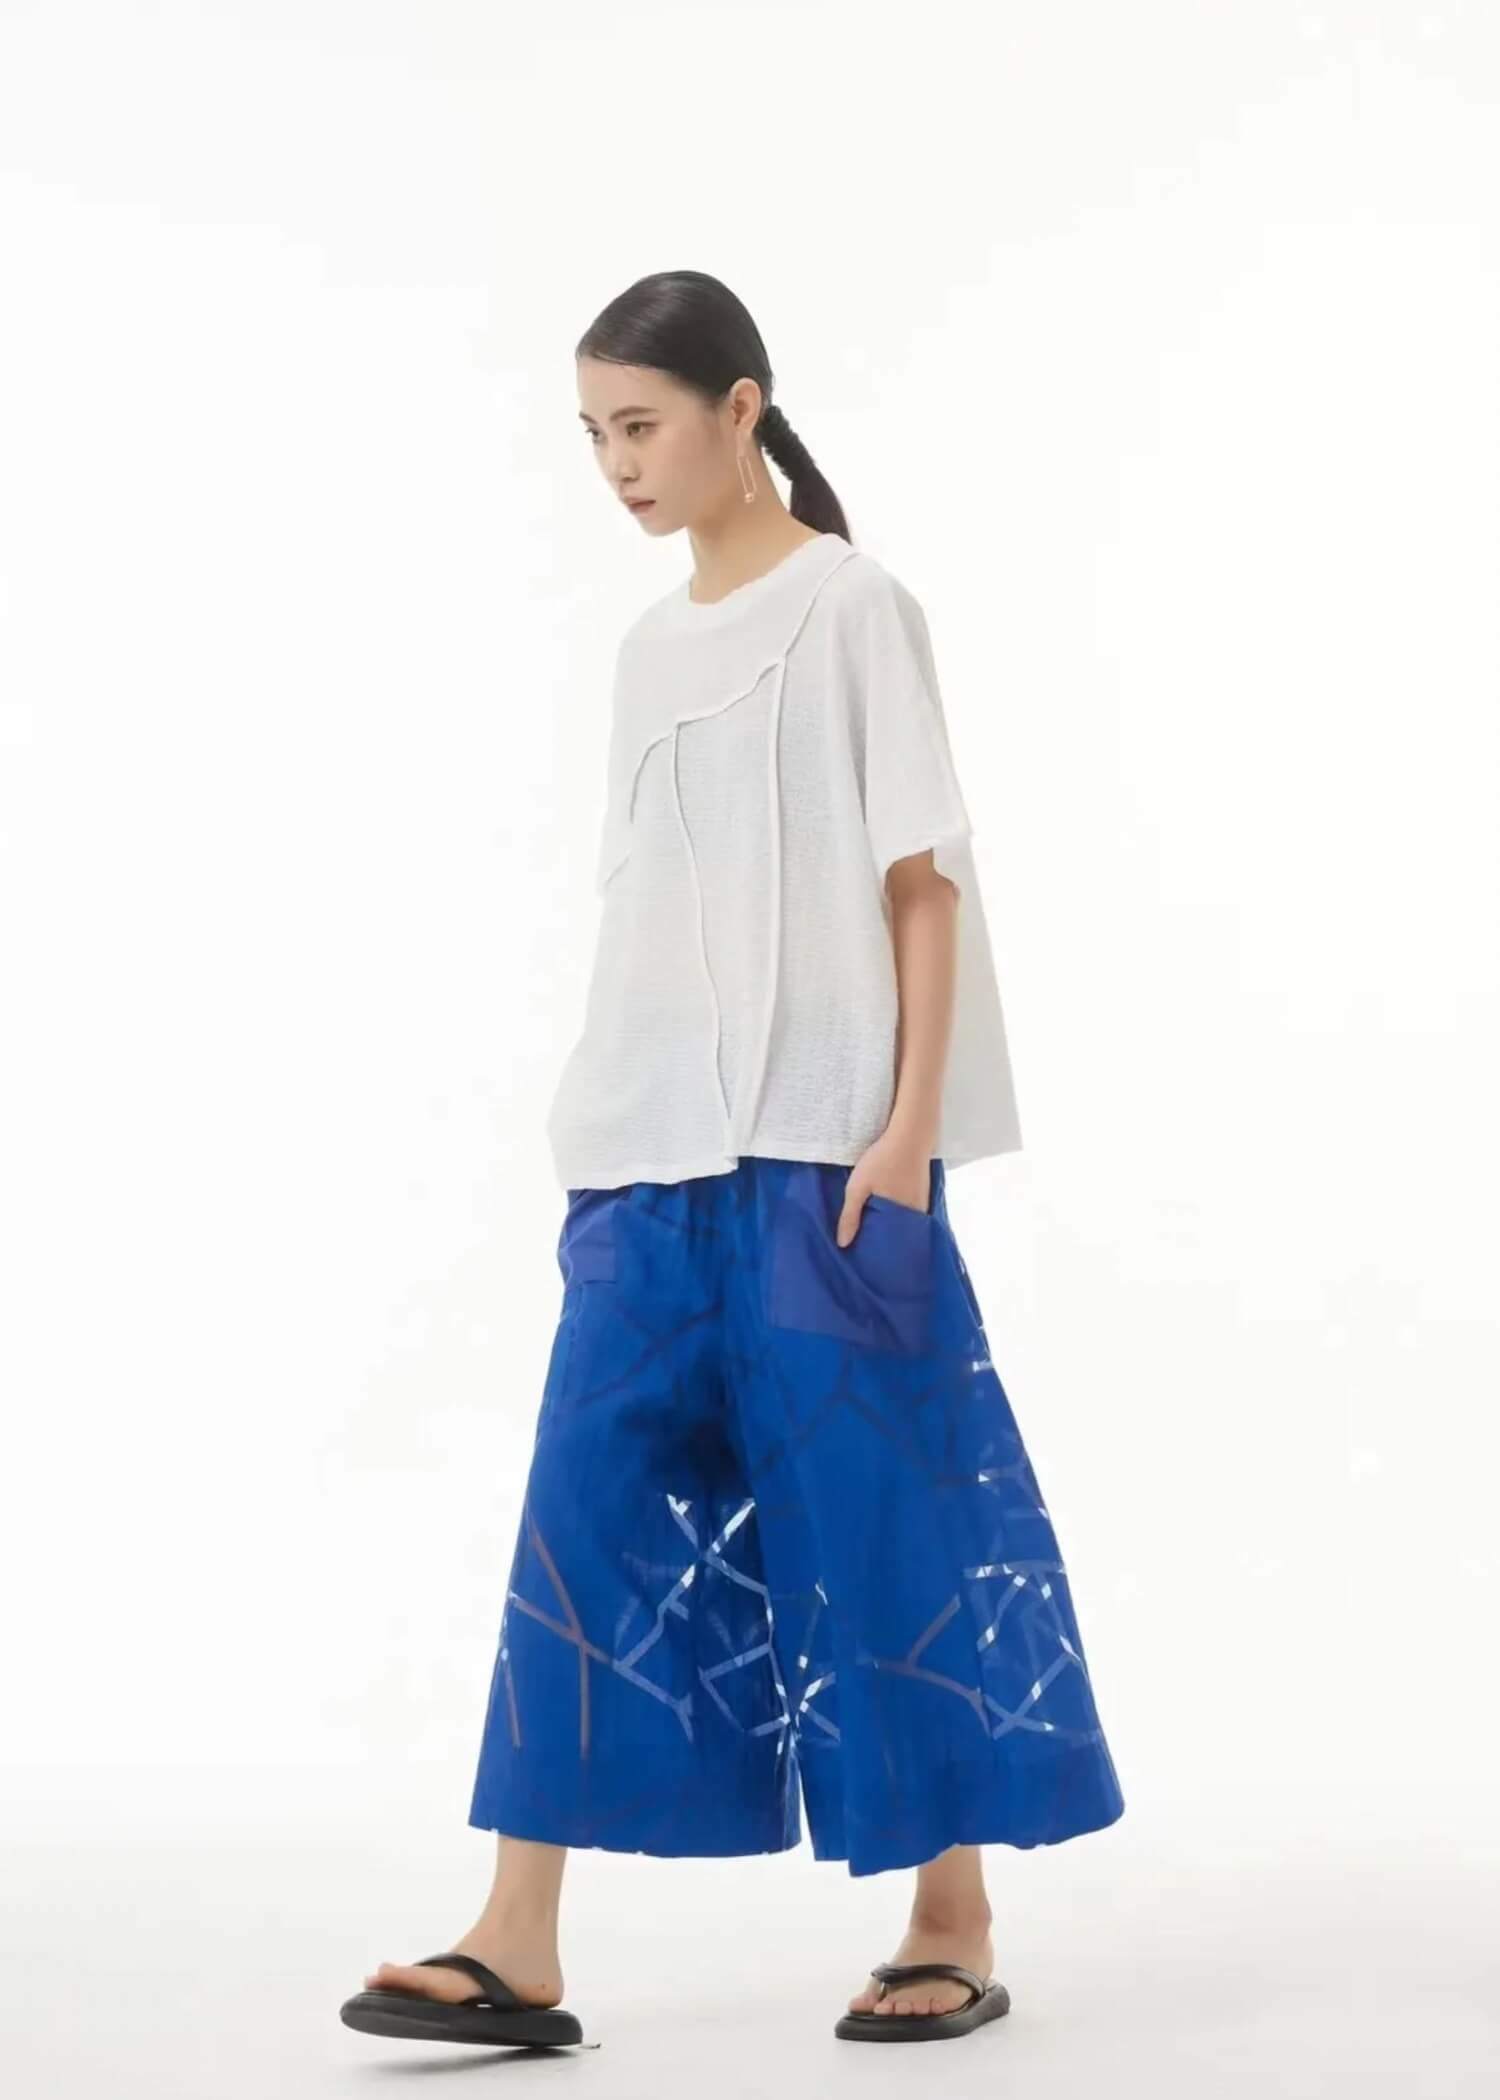 Mid Rise Pants blue Women's original loose casual wide leg pockets semi-transparent see-through womens trousers for woman European and the United States spring summer fashion season clothing